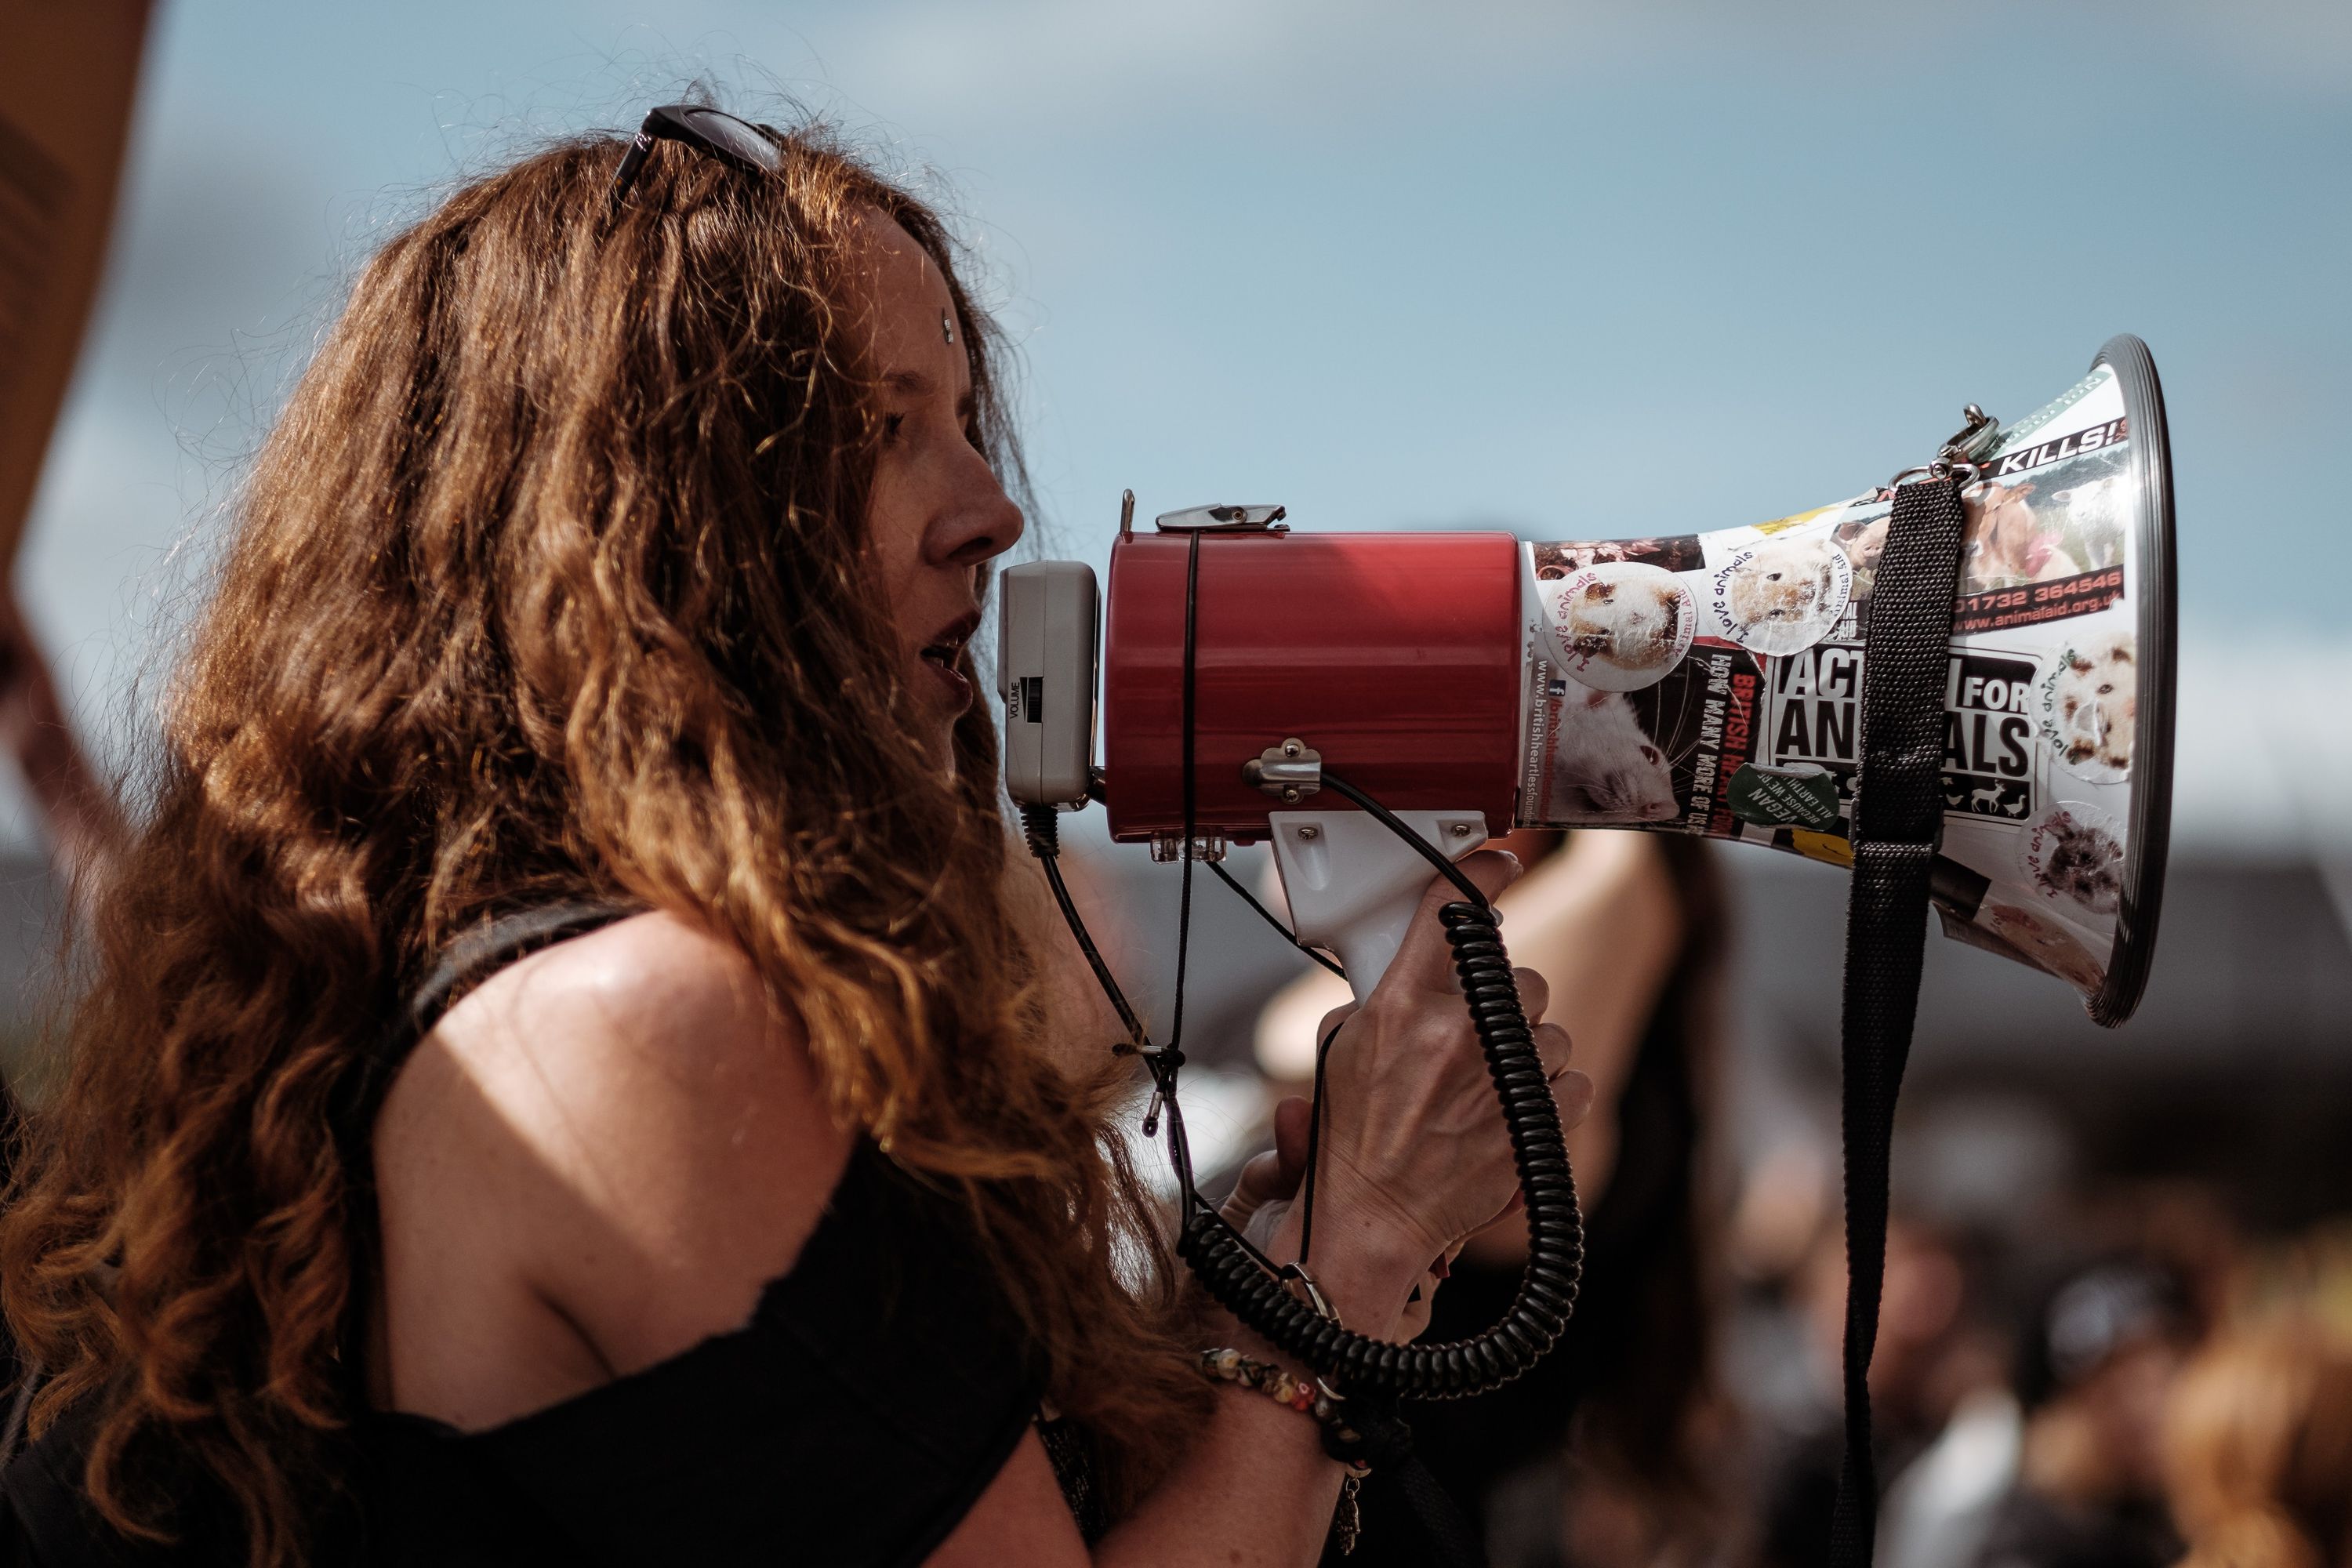 image of a woman wearing a black shirt and using a megaphone